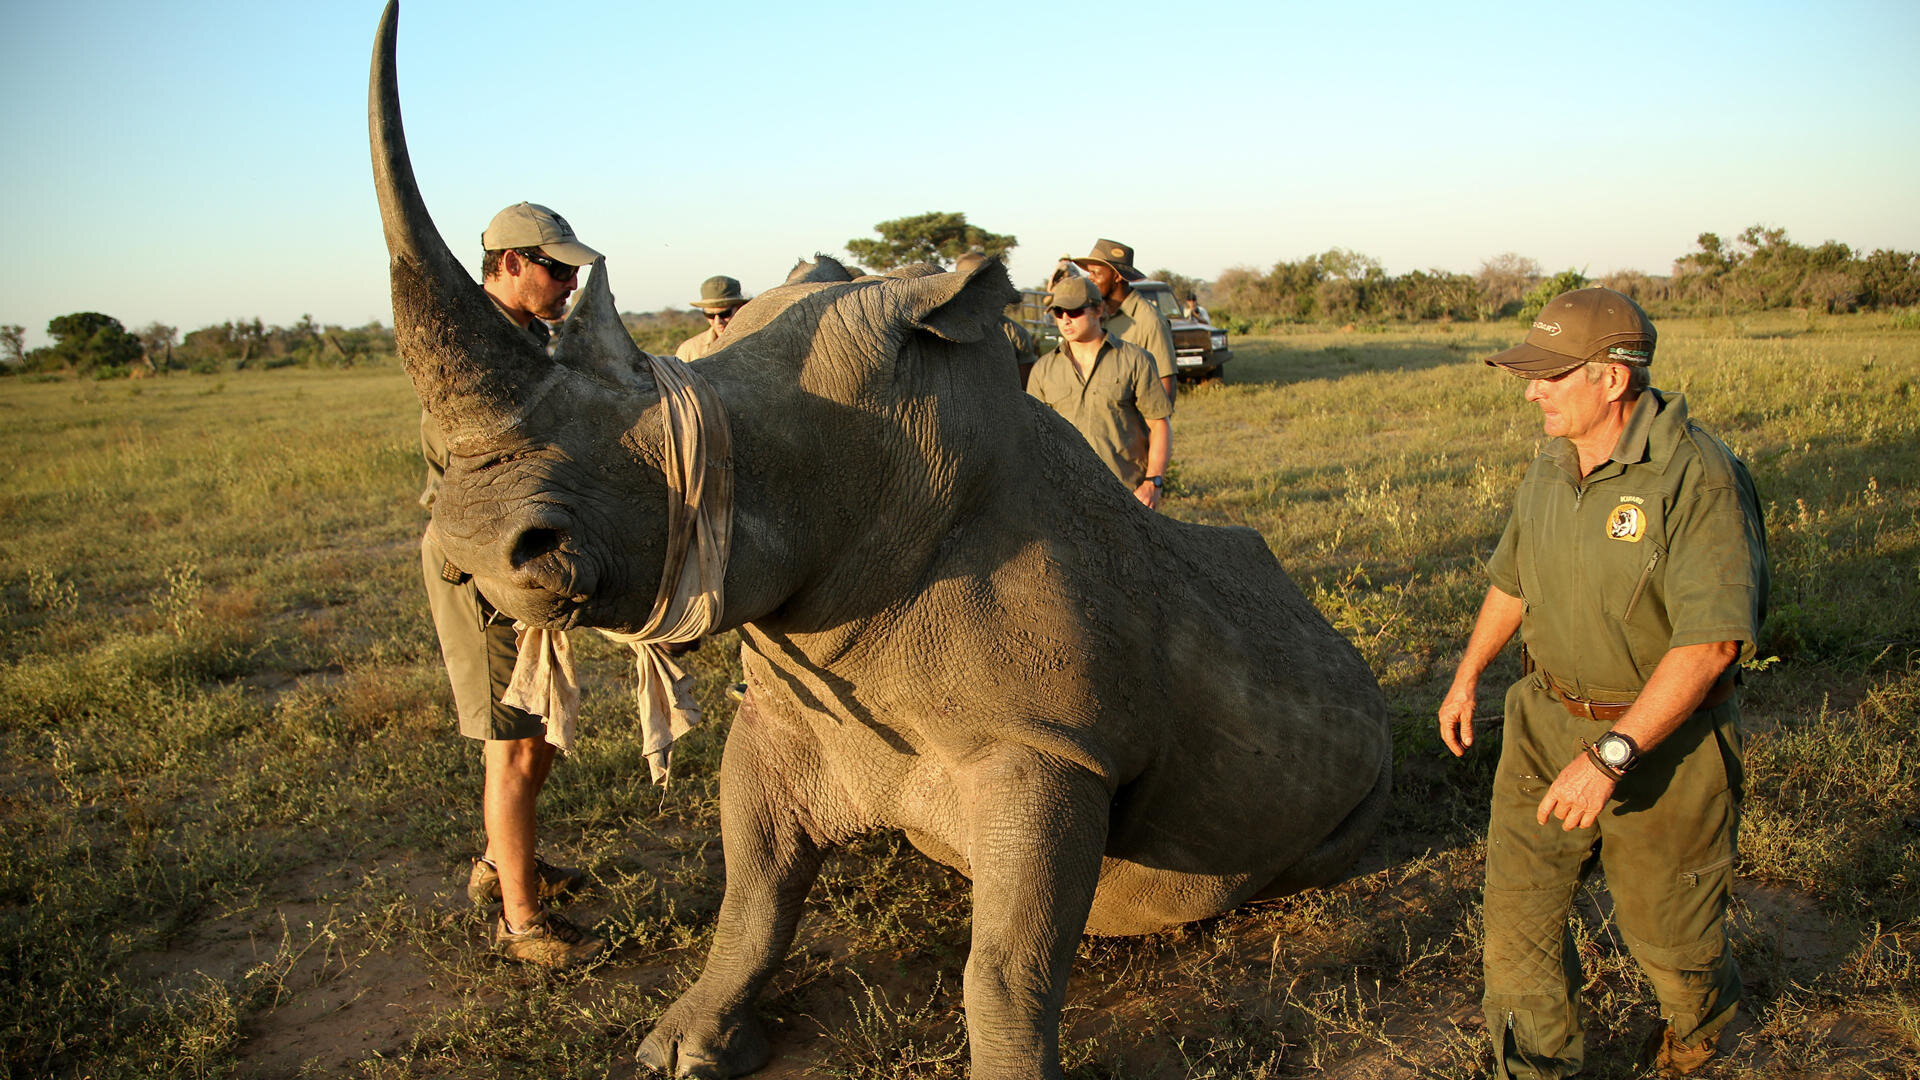 rhino-conservation-activitiy-at-andbeyond-phinda-private-game-reserve1.jpg